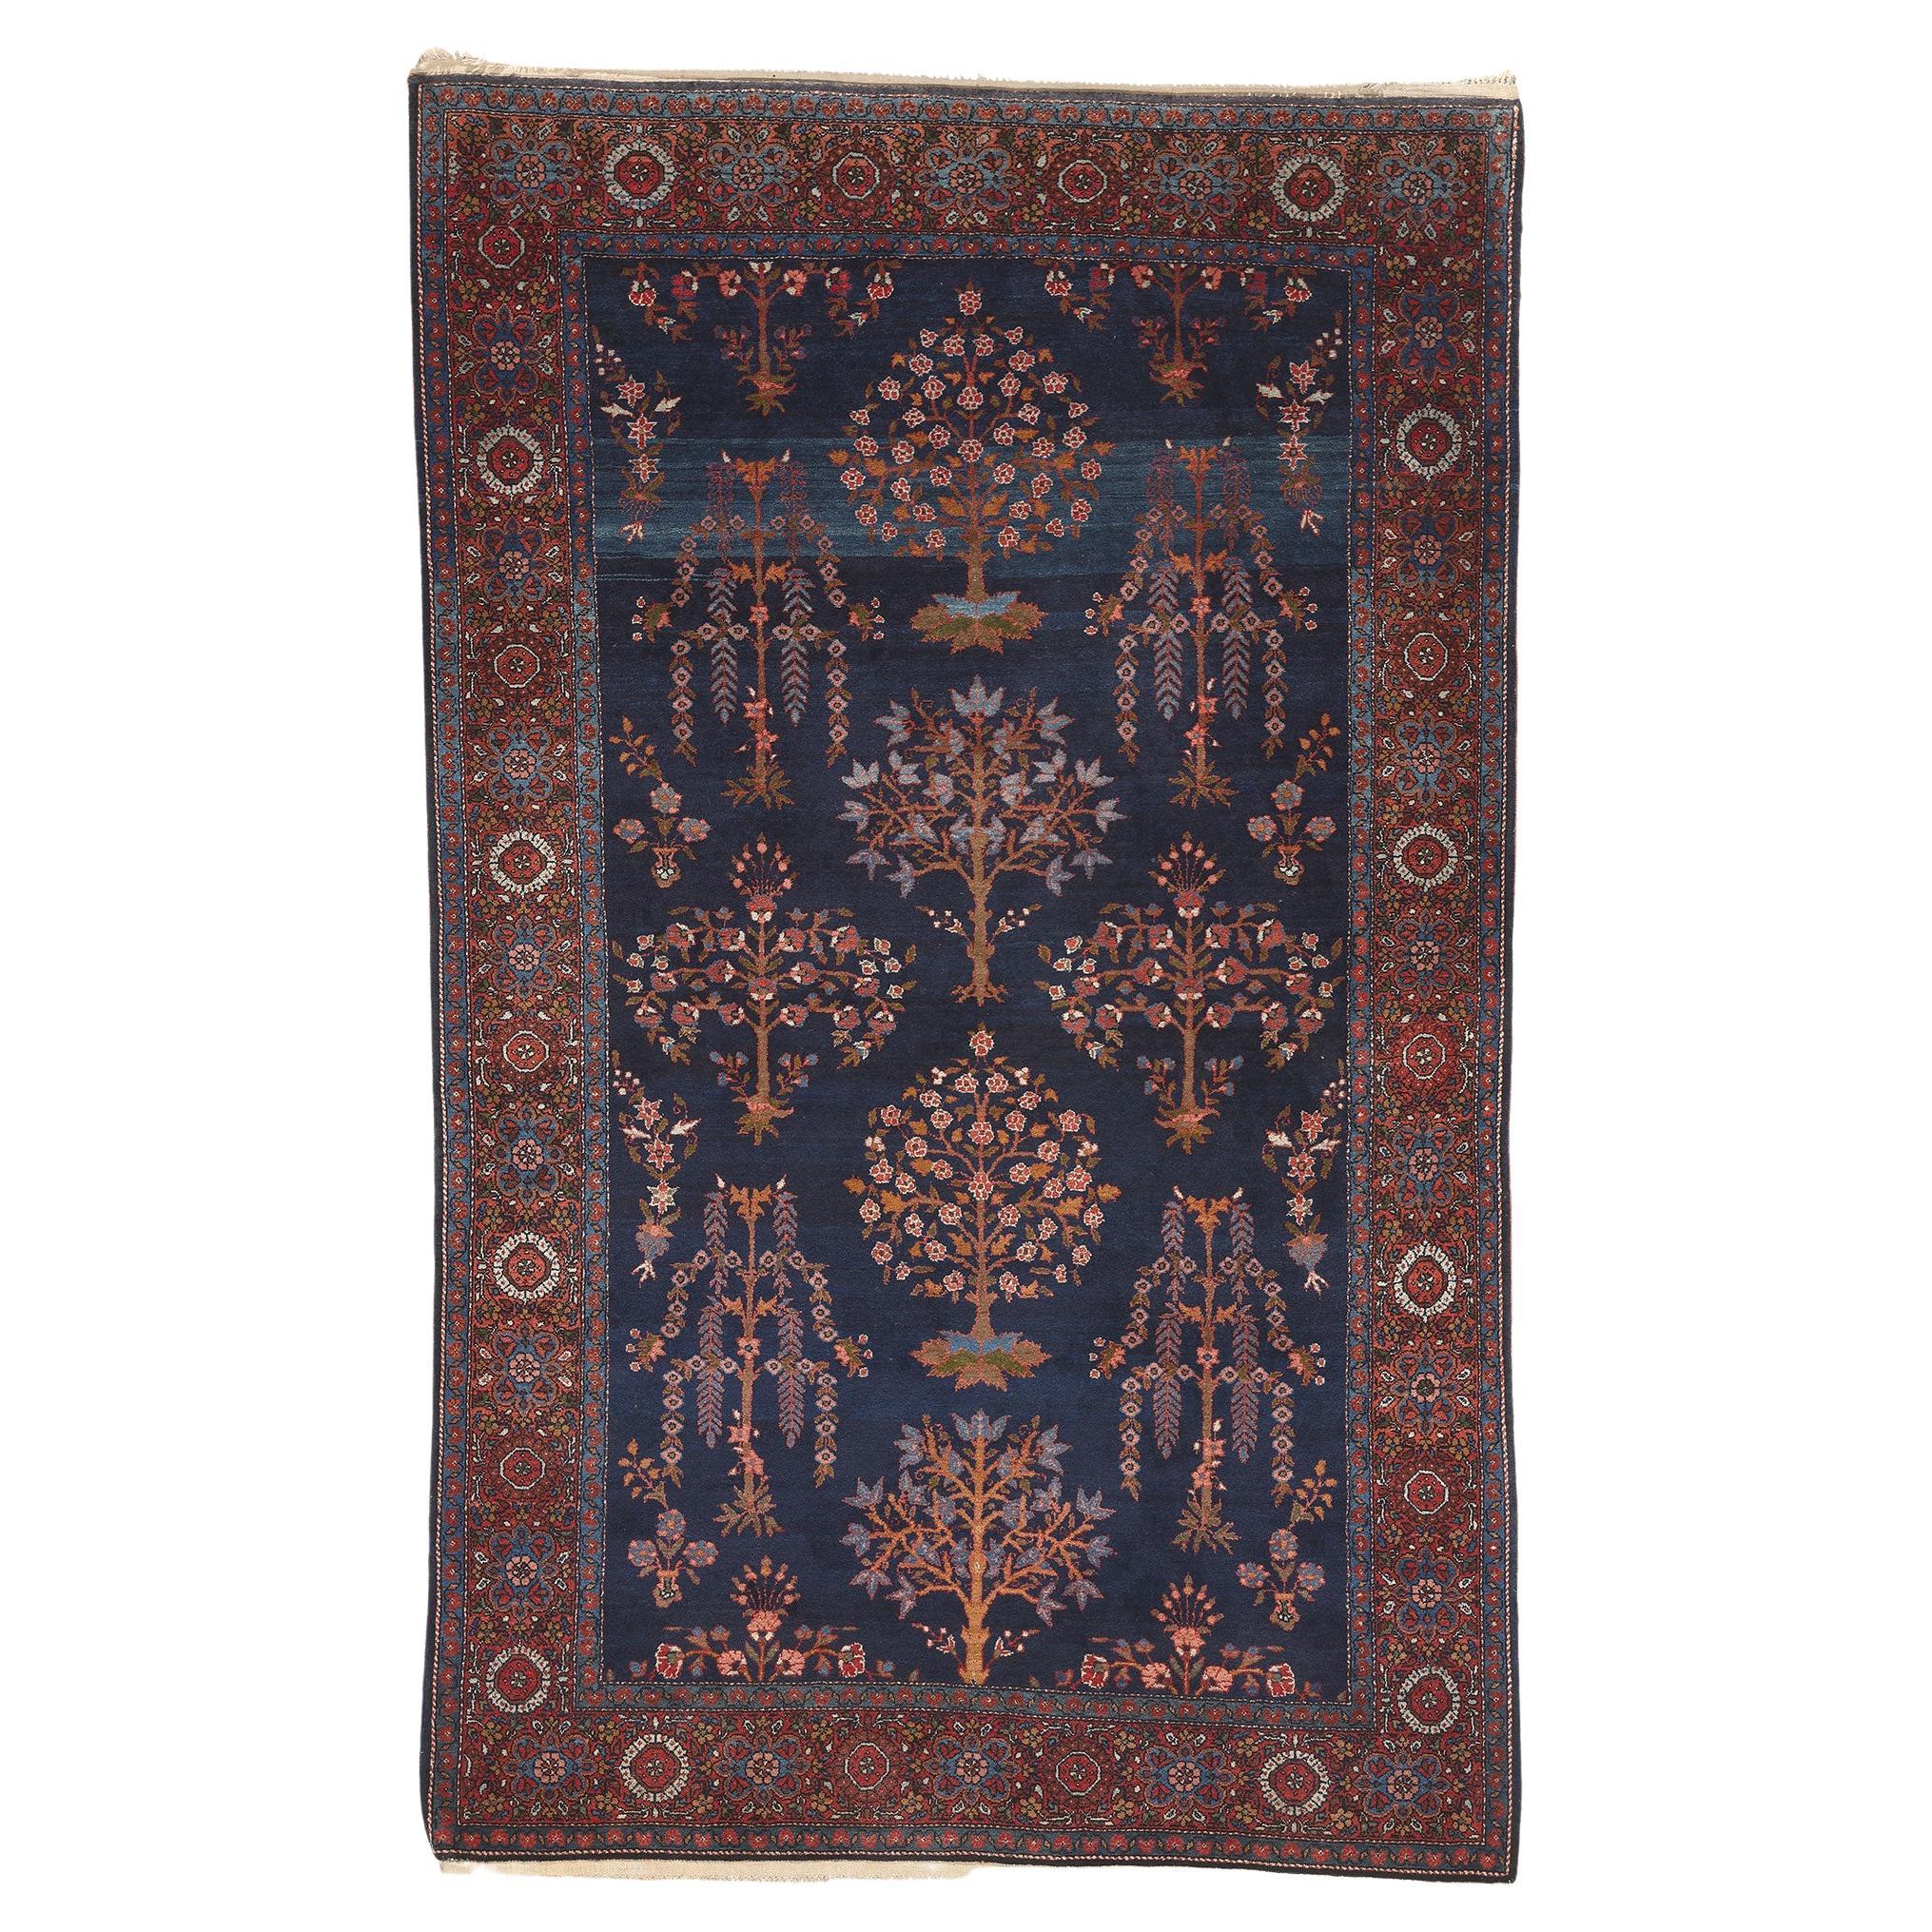 Antique Persian Sarouk Farahan Rug, Beguiling Beauty Meets Timeless Appeal